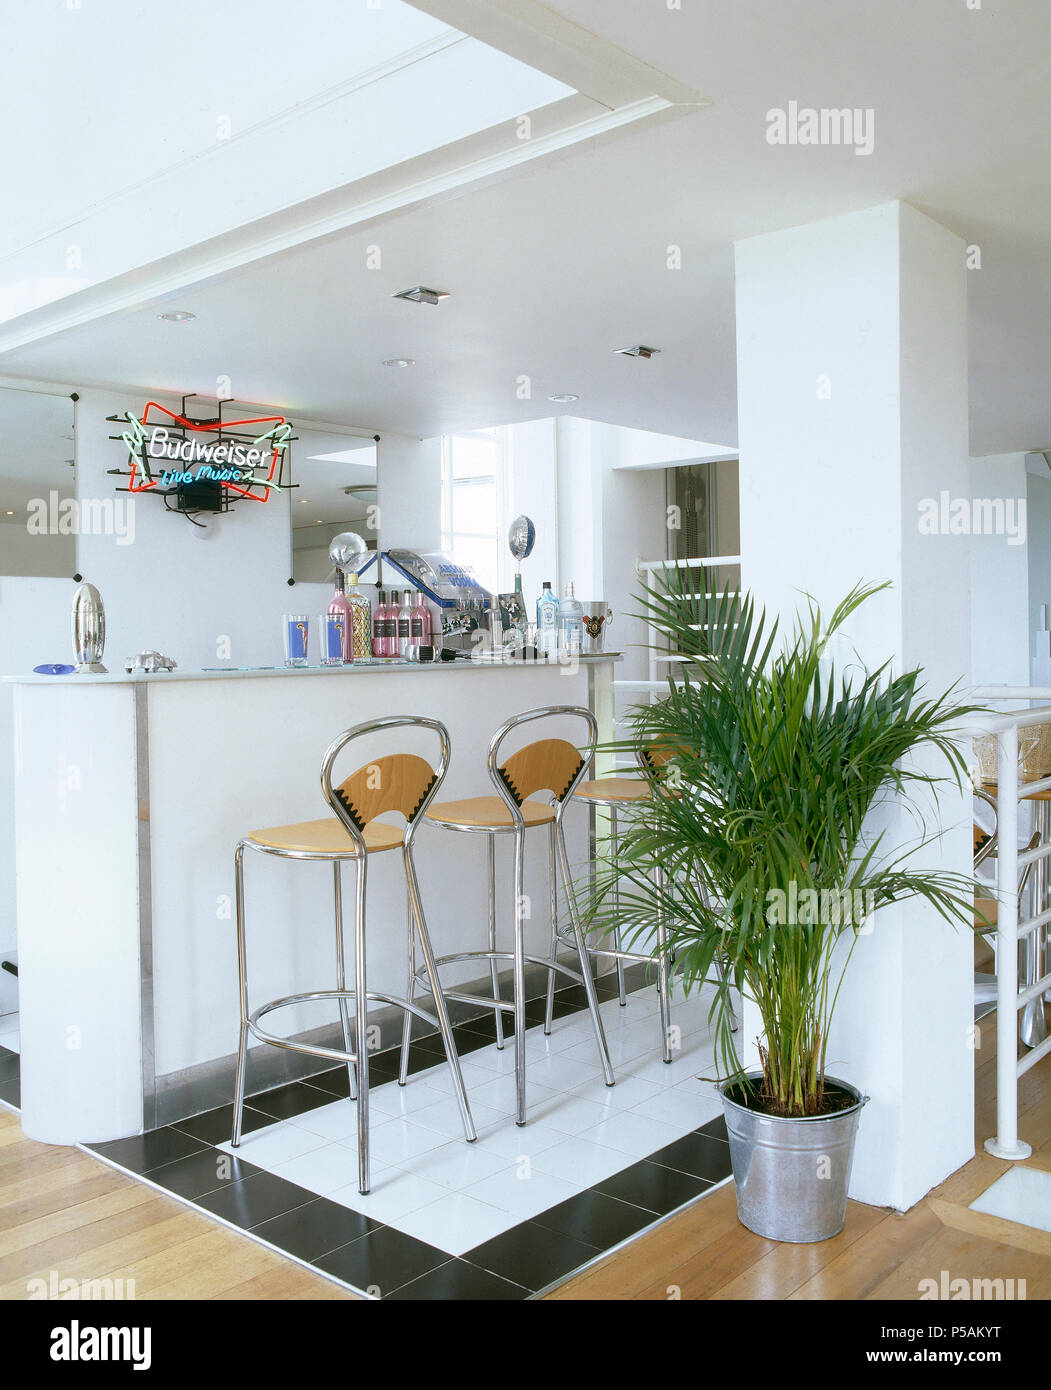 Potted palm in modern open plan kitchen with chrome stools at breakfast bar Stock Photo